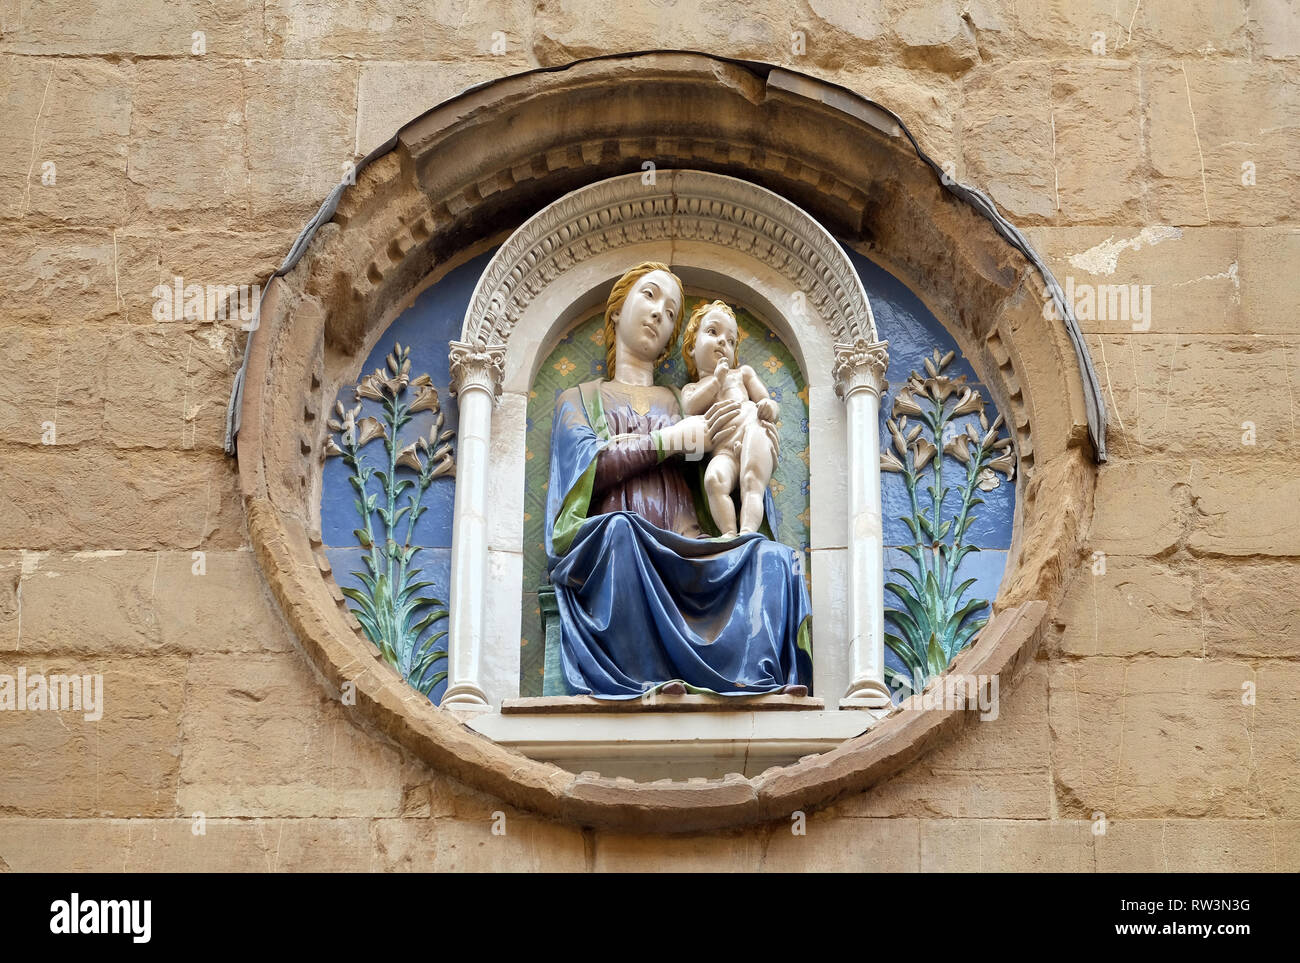 Medallion with the Virgin Mary and Child by Luca della Robbia on the facade of Orsanmichele Church in Florence, Tuscany, Italy Stock Photo